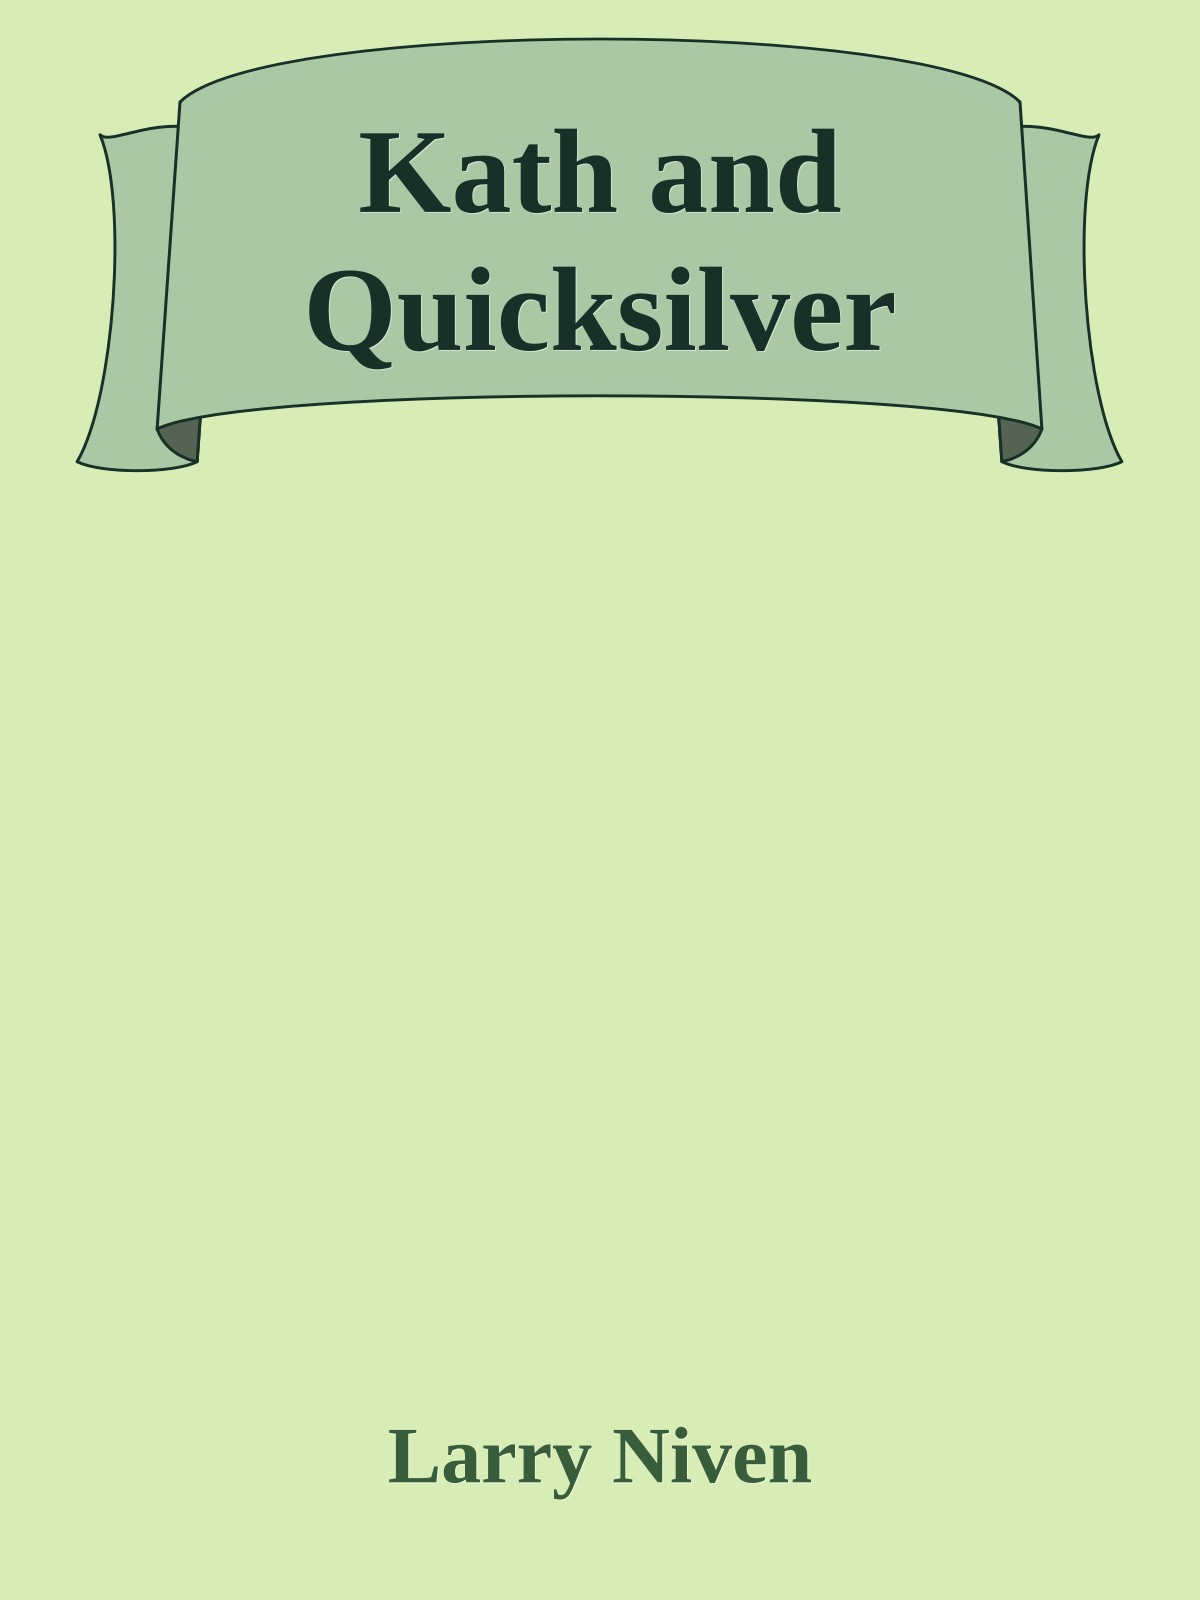 Kath and Quicksilver